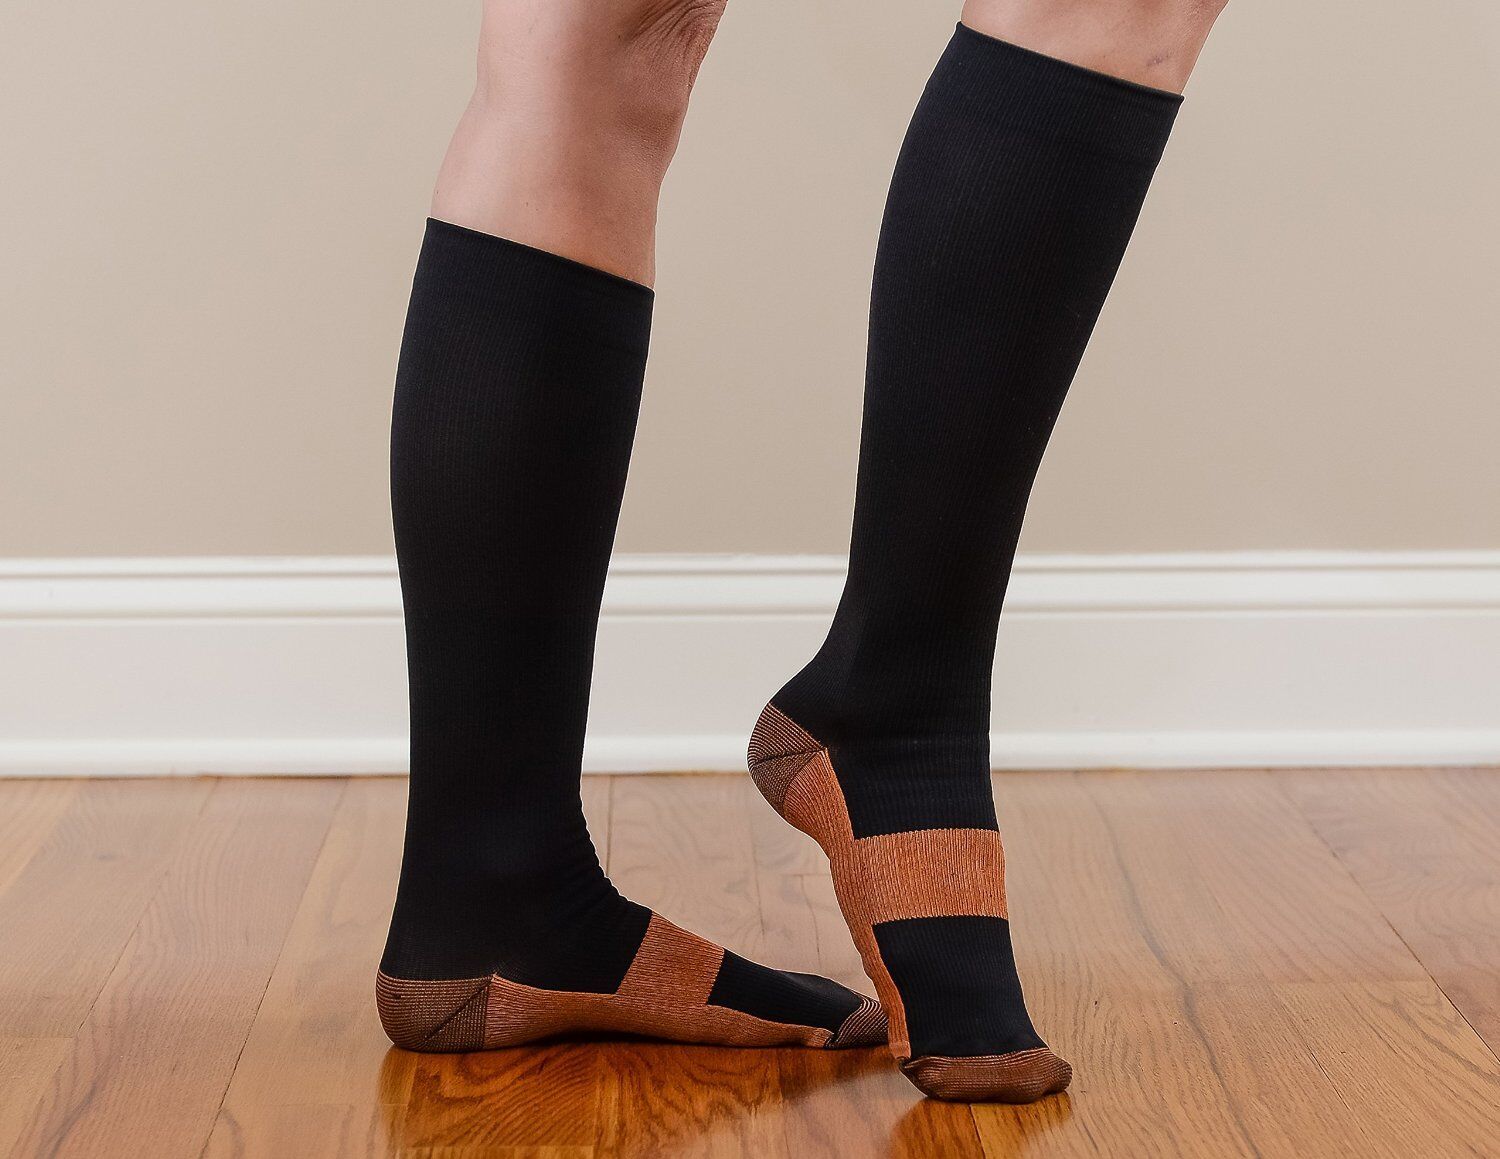 Copper Compression Socks Support Stockings 20-30 mmHg Men Women S-XXL (1-3 Pair) Copper Compression Socks Does Not Apply